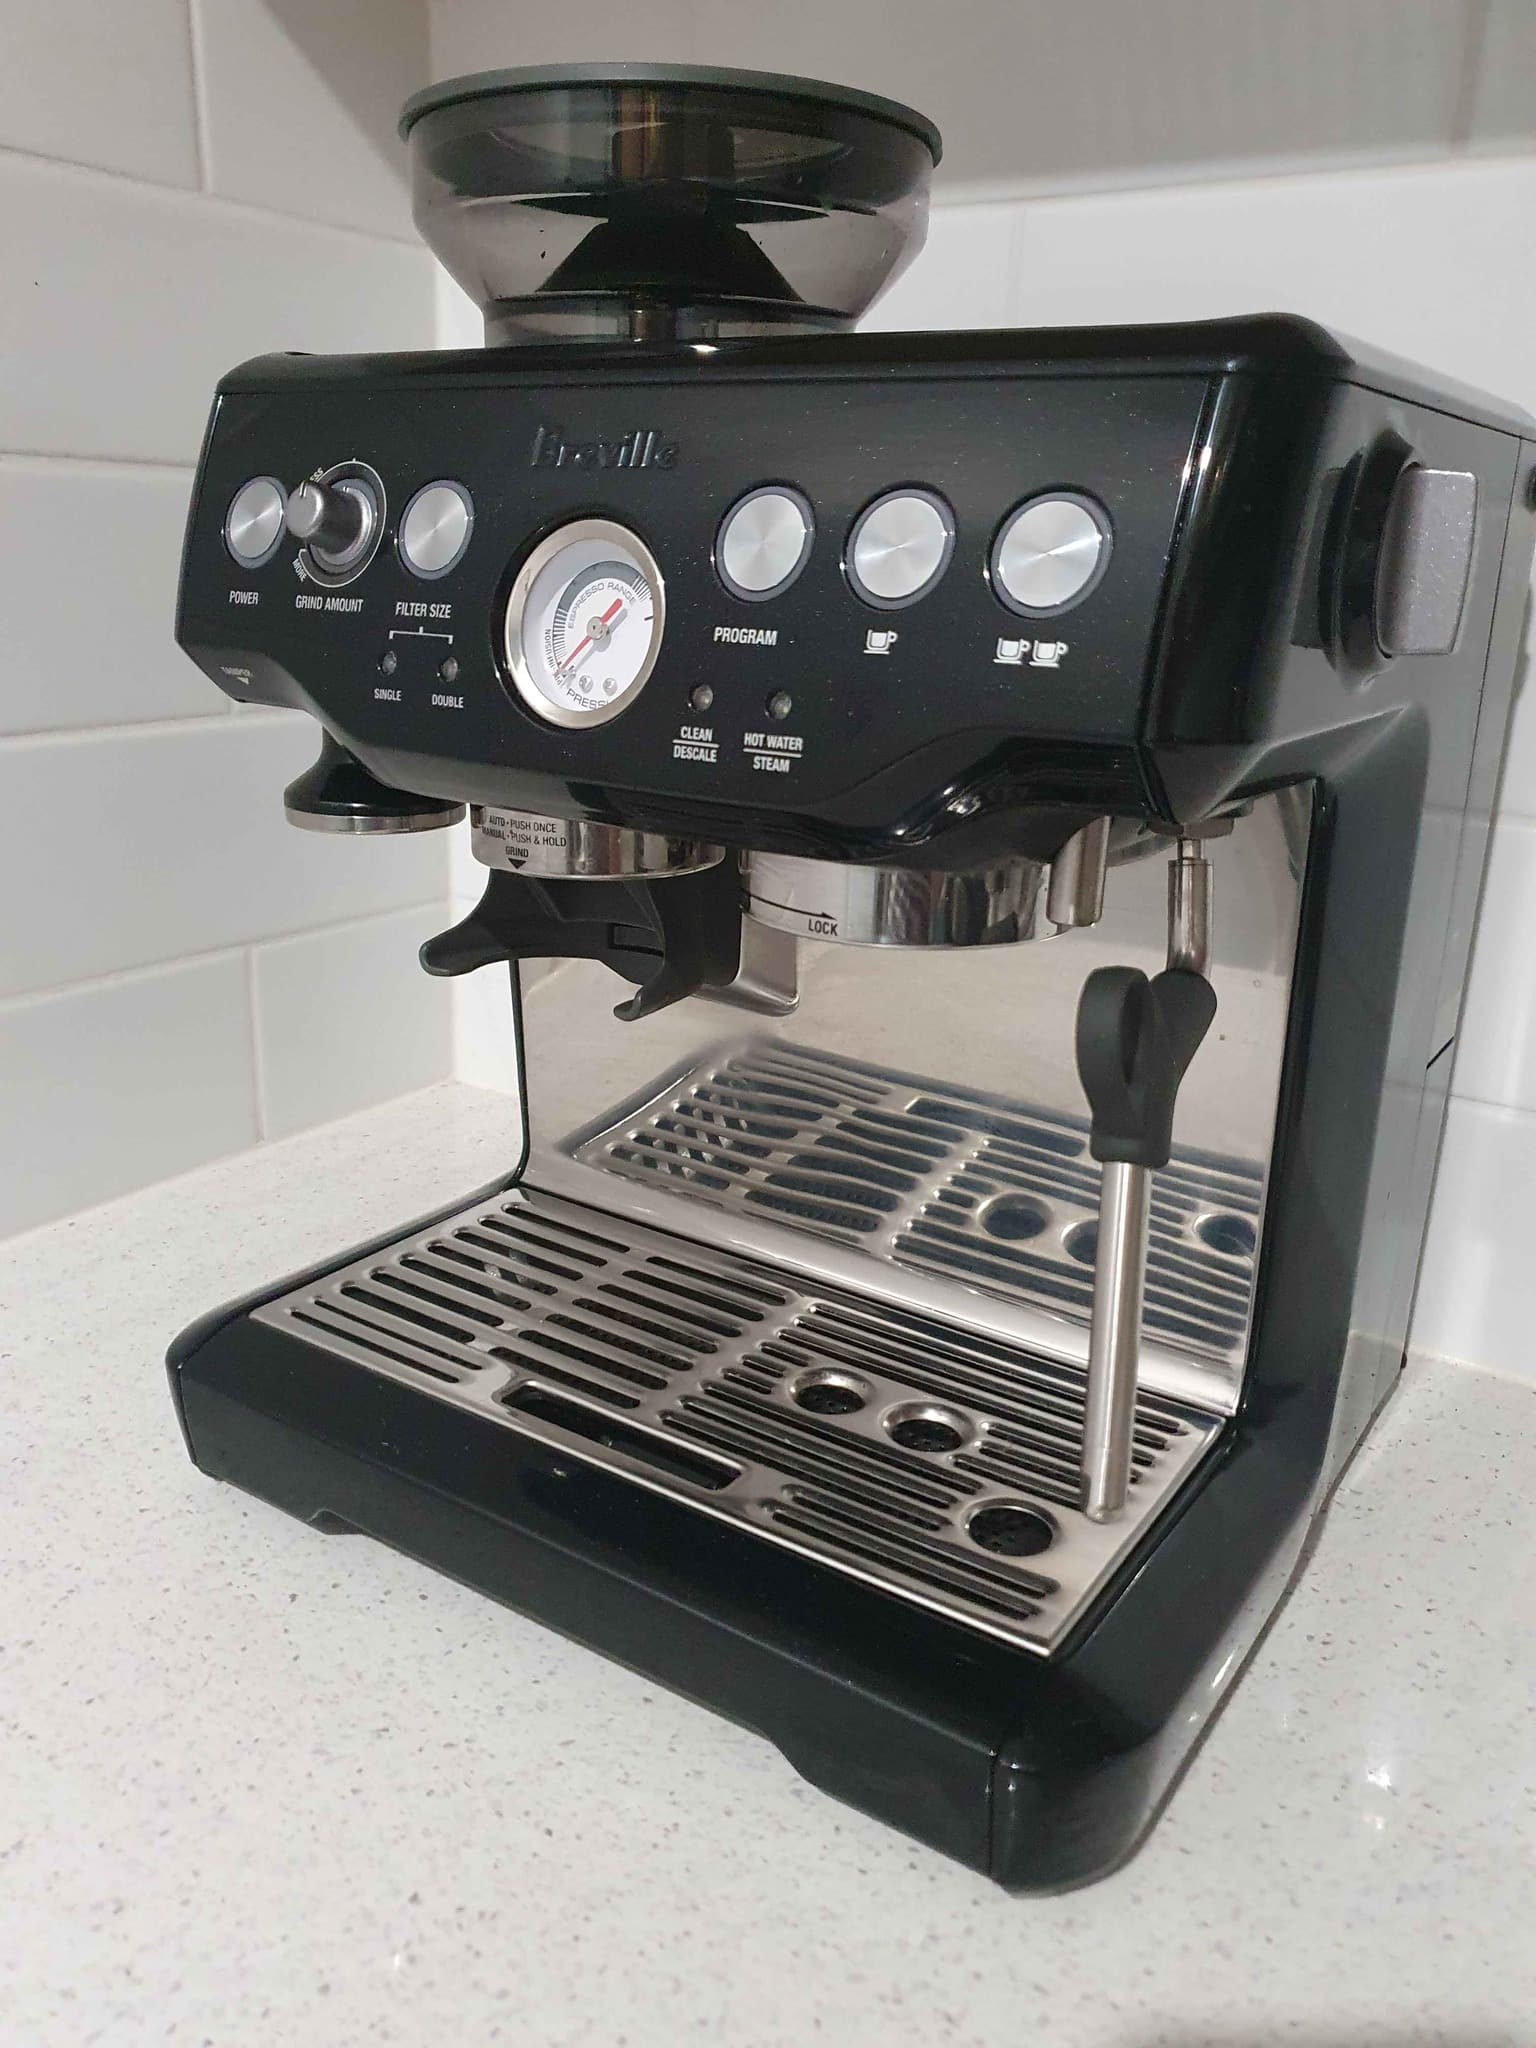 Breville Barista Express has indicators for cleaning and hot water steam